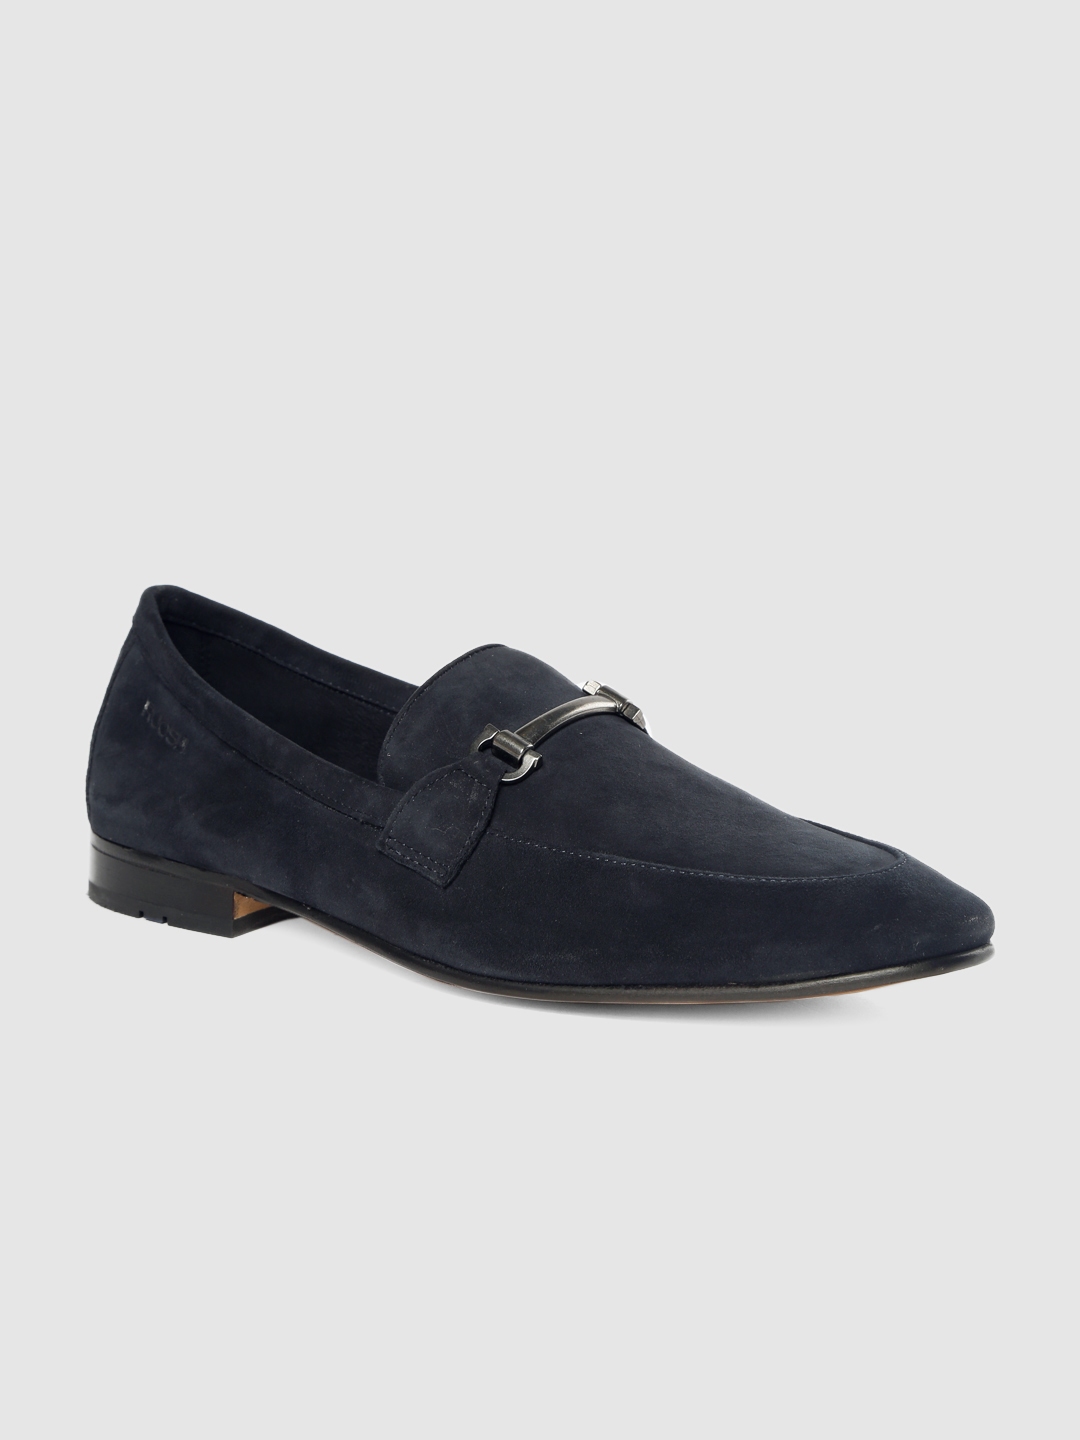 Buy Ruosh Men Blue Suede Loafers - Casual Shoes for Men 10516928 | Myntra